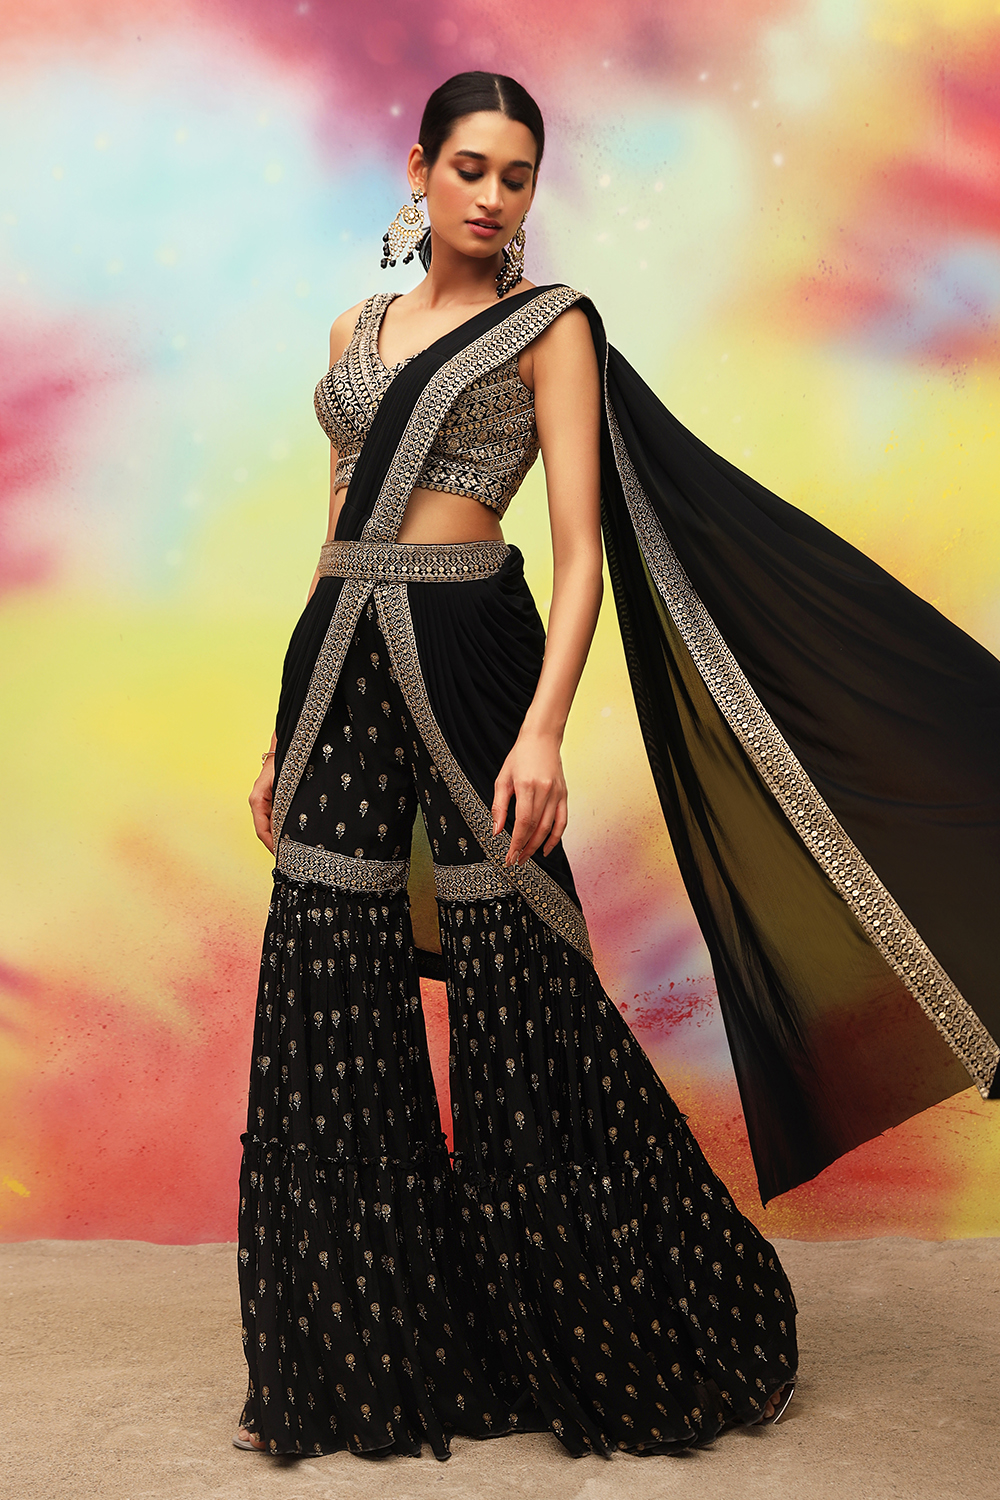 Pant Saree  All You Need to Know About Wearing a Pant Style Saree